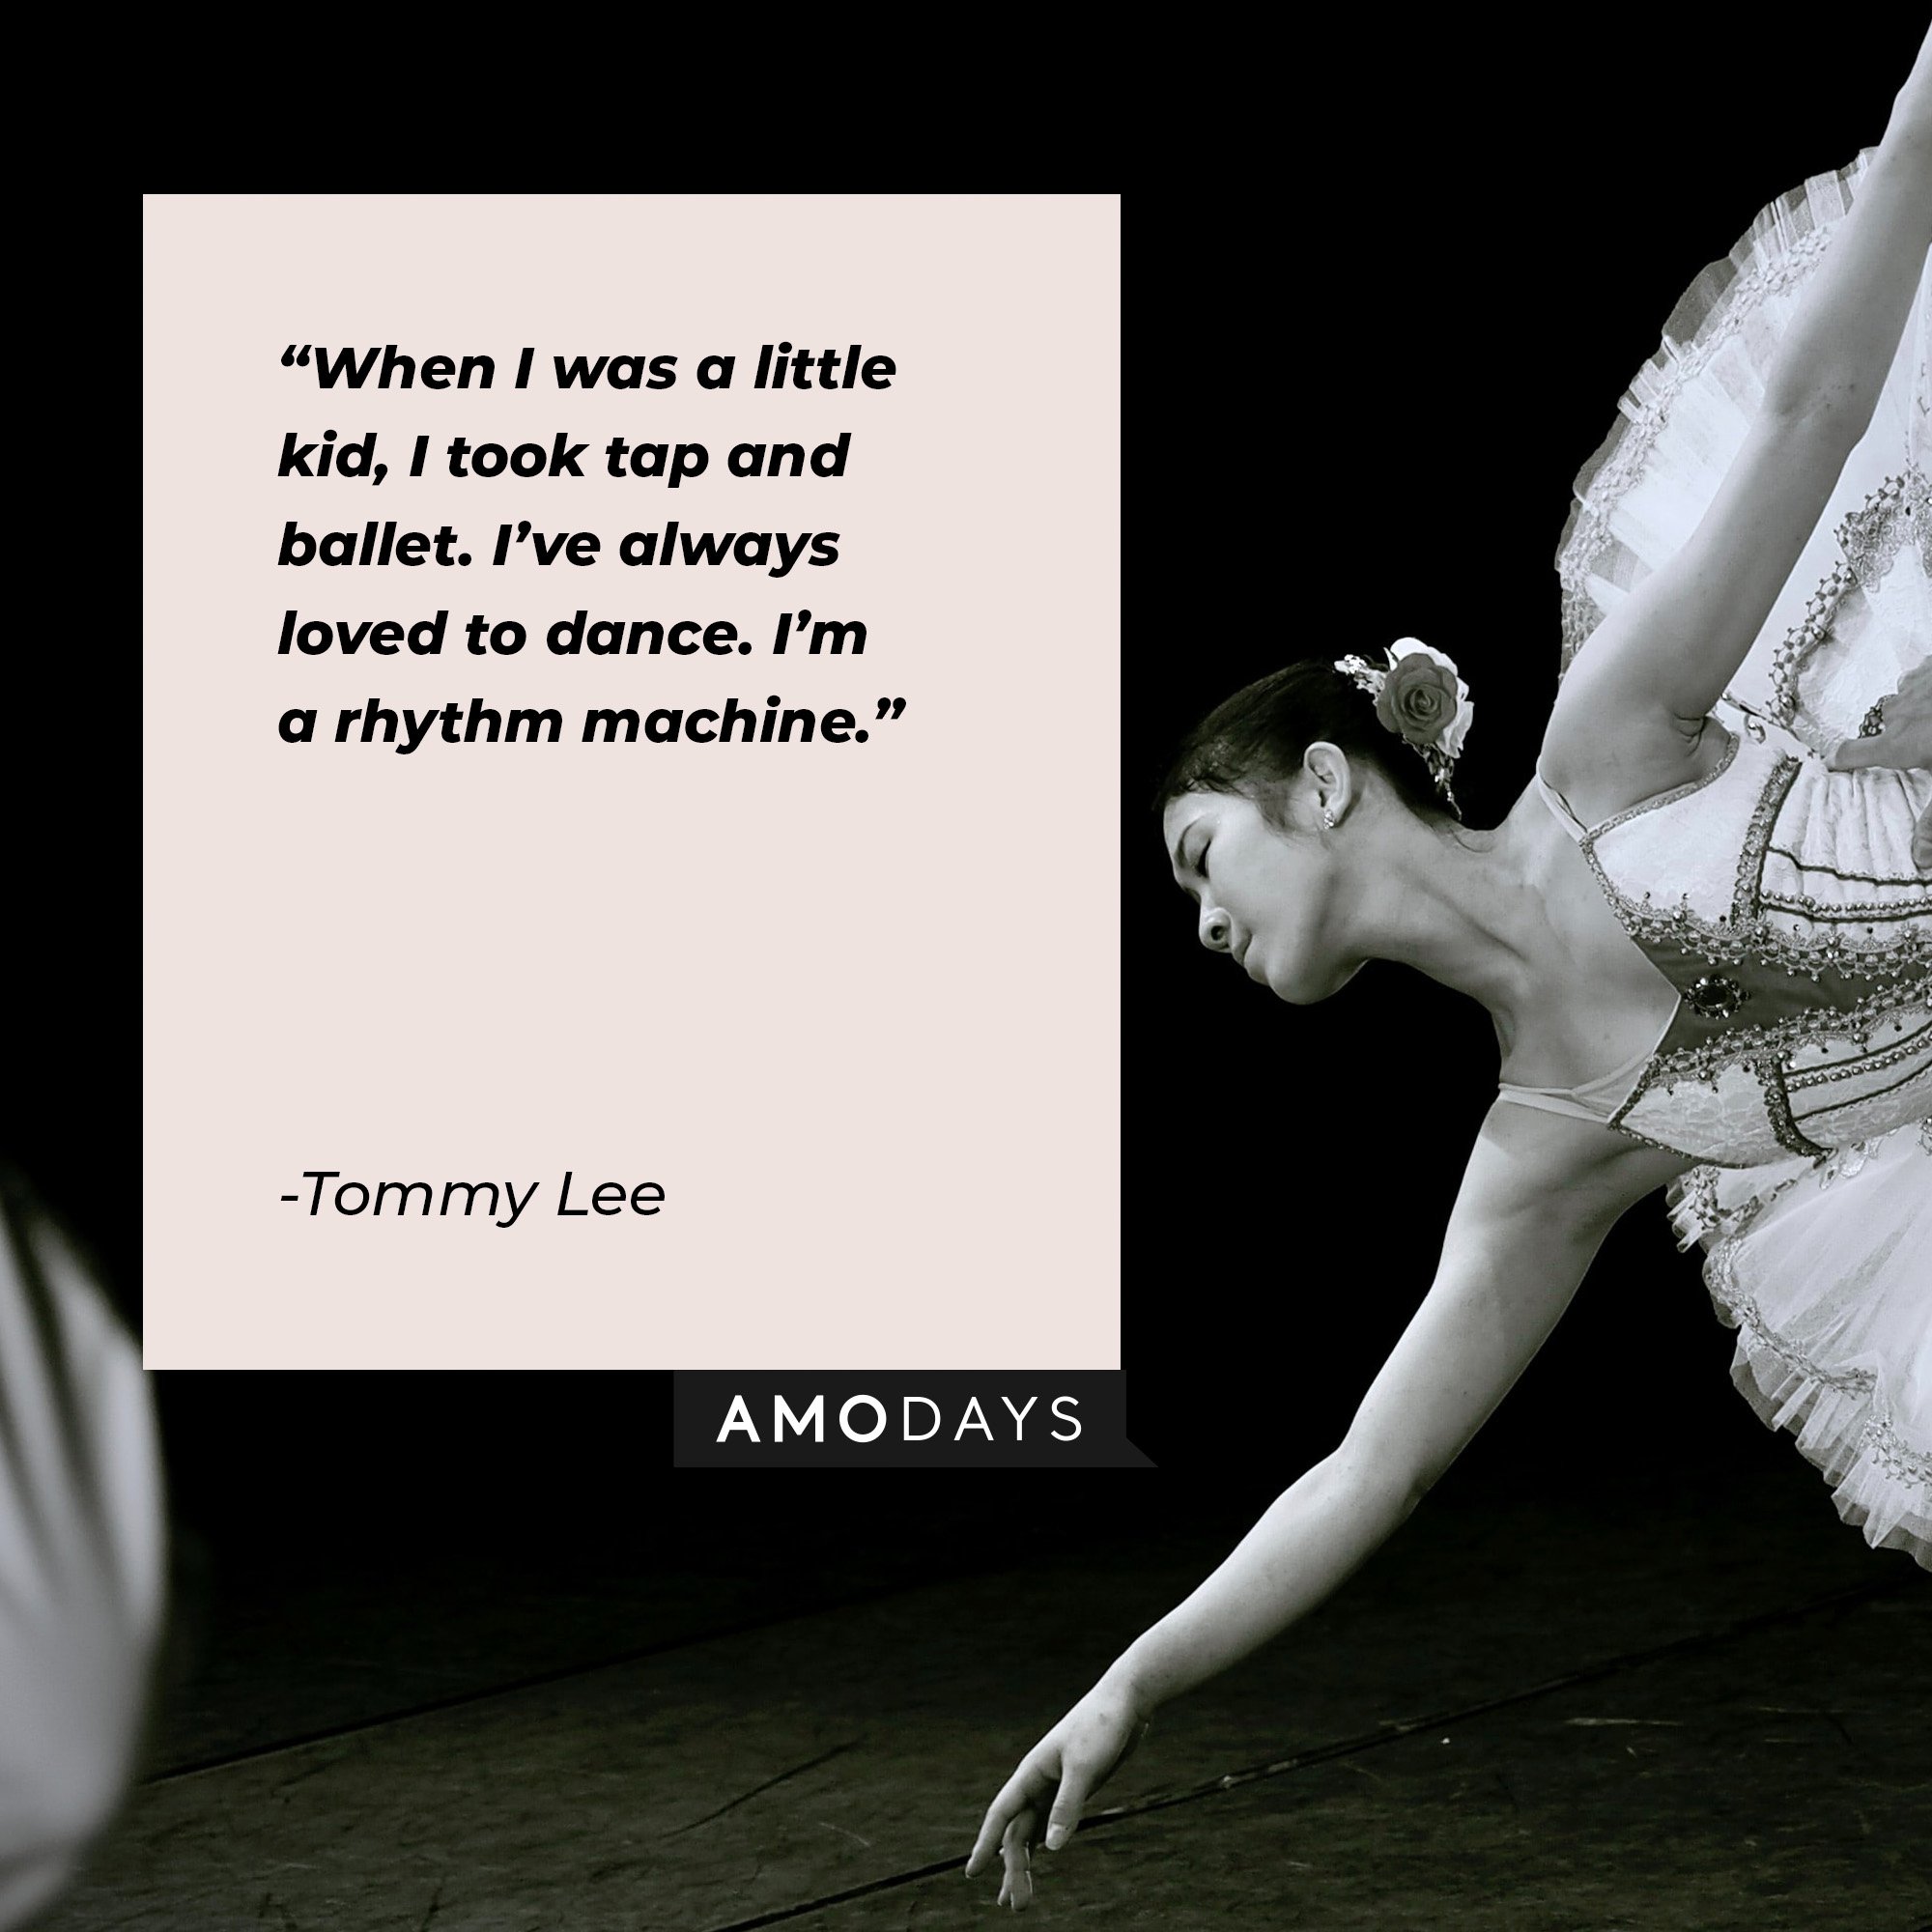  Tommy Lee’s quote: “When I was a little kid, I took tap and ballet. I’ve always loved to dance. I’m a rhythm machine.” | Image: AmoDays